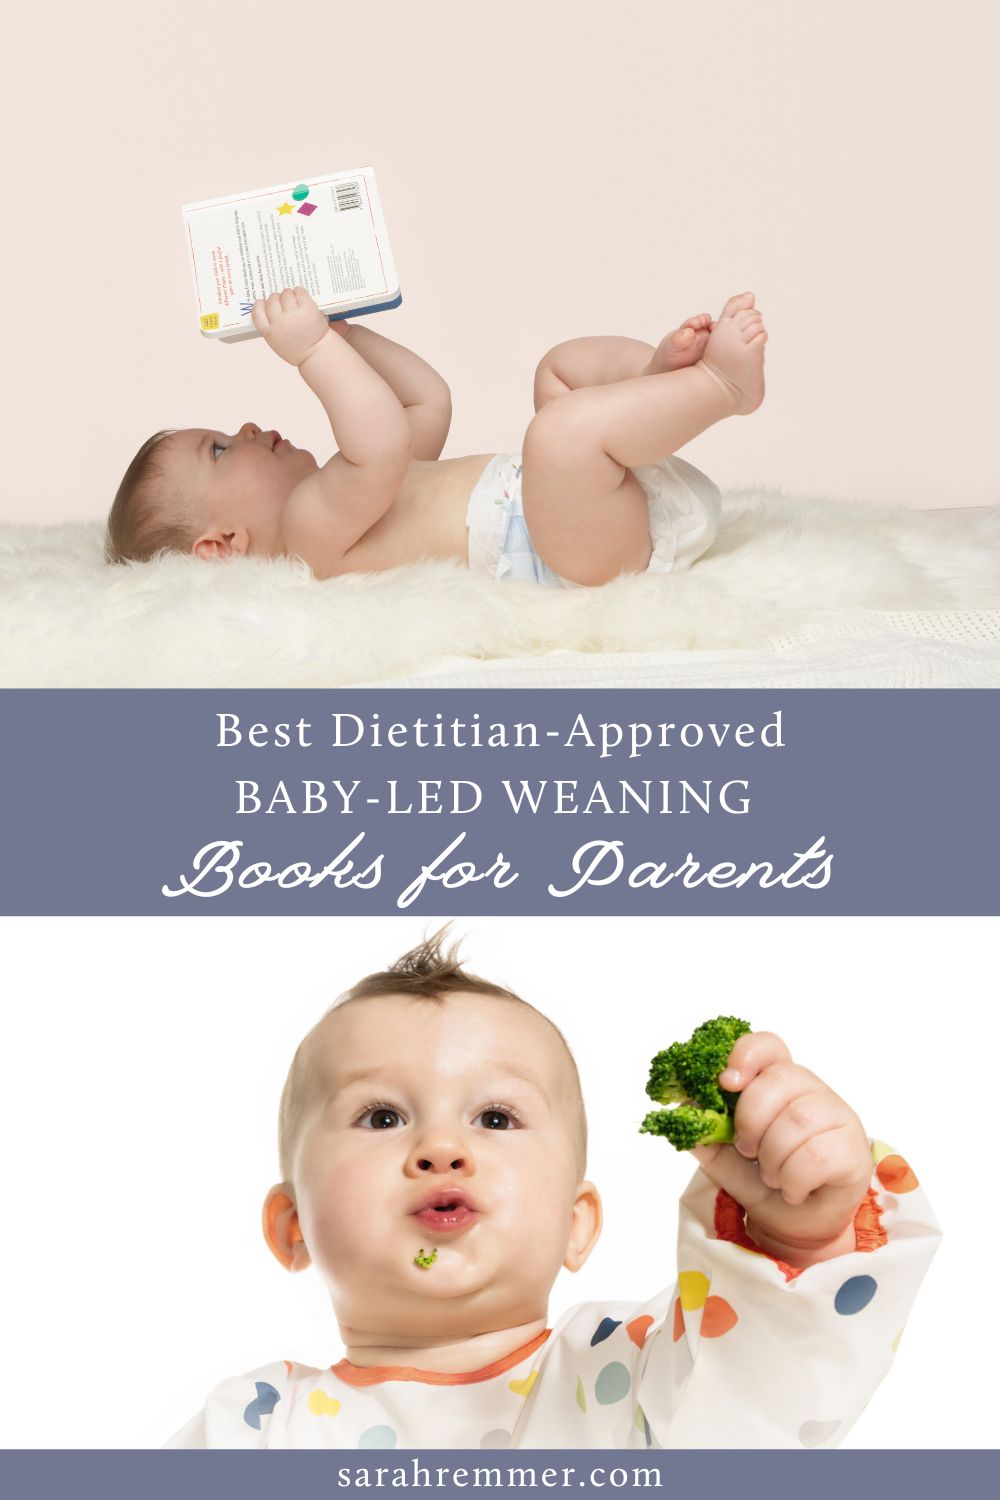 Looking for the best baby-led weaning books? Find the best dietitian-approved books here to help you start solids with your baby confidently.